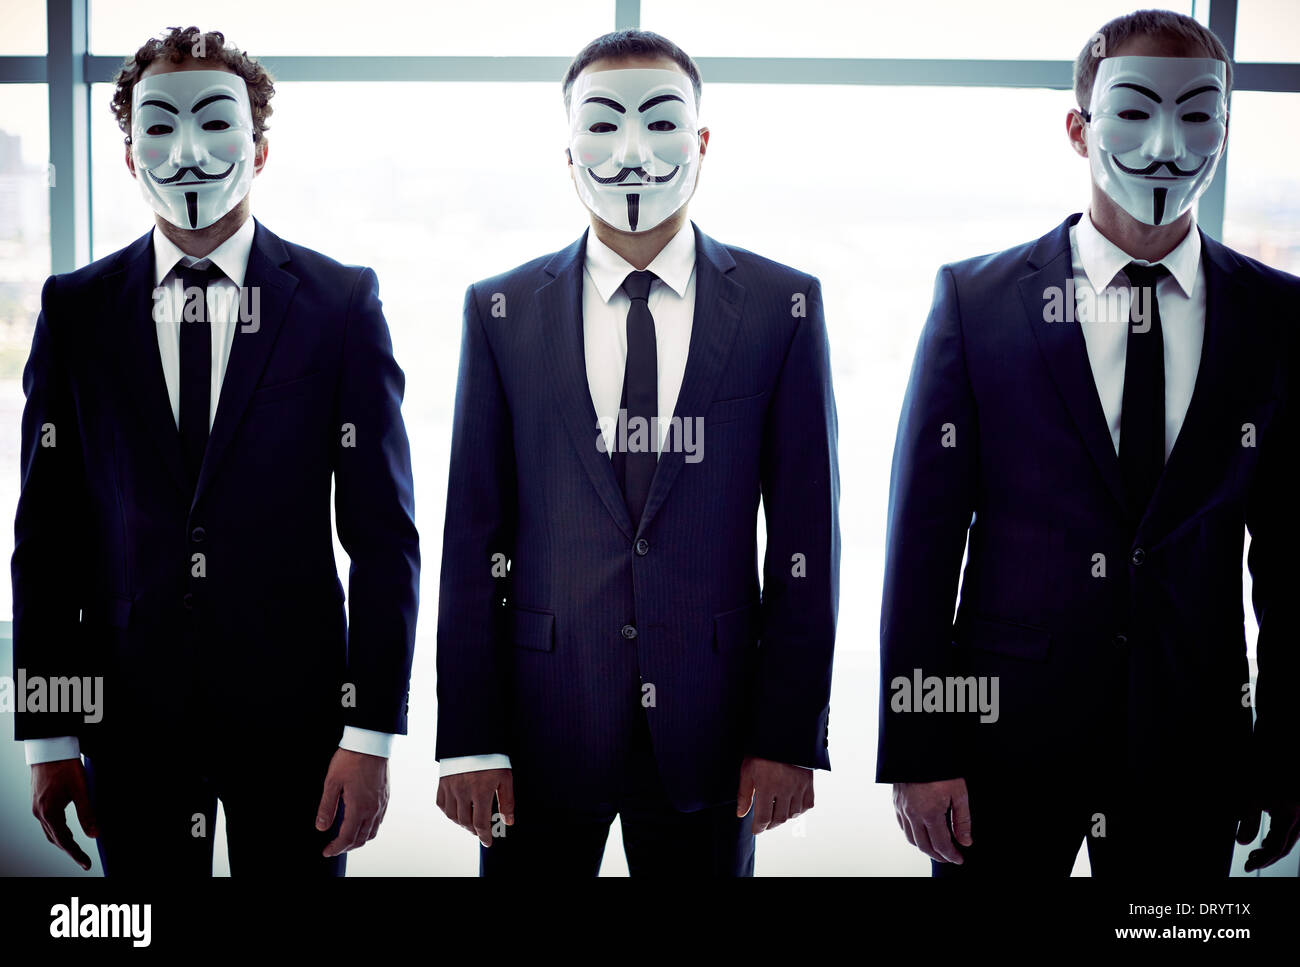 Portrait of three colleagues hiding behind Guy Fawkes masks Stock Photo